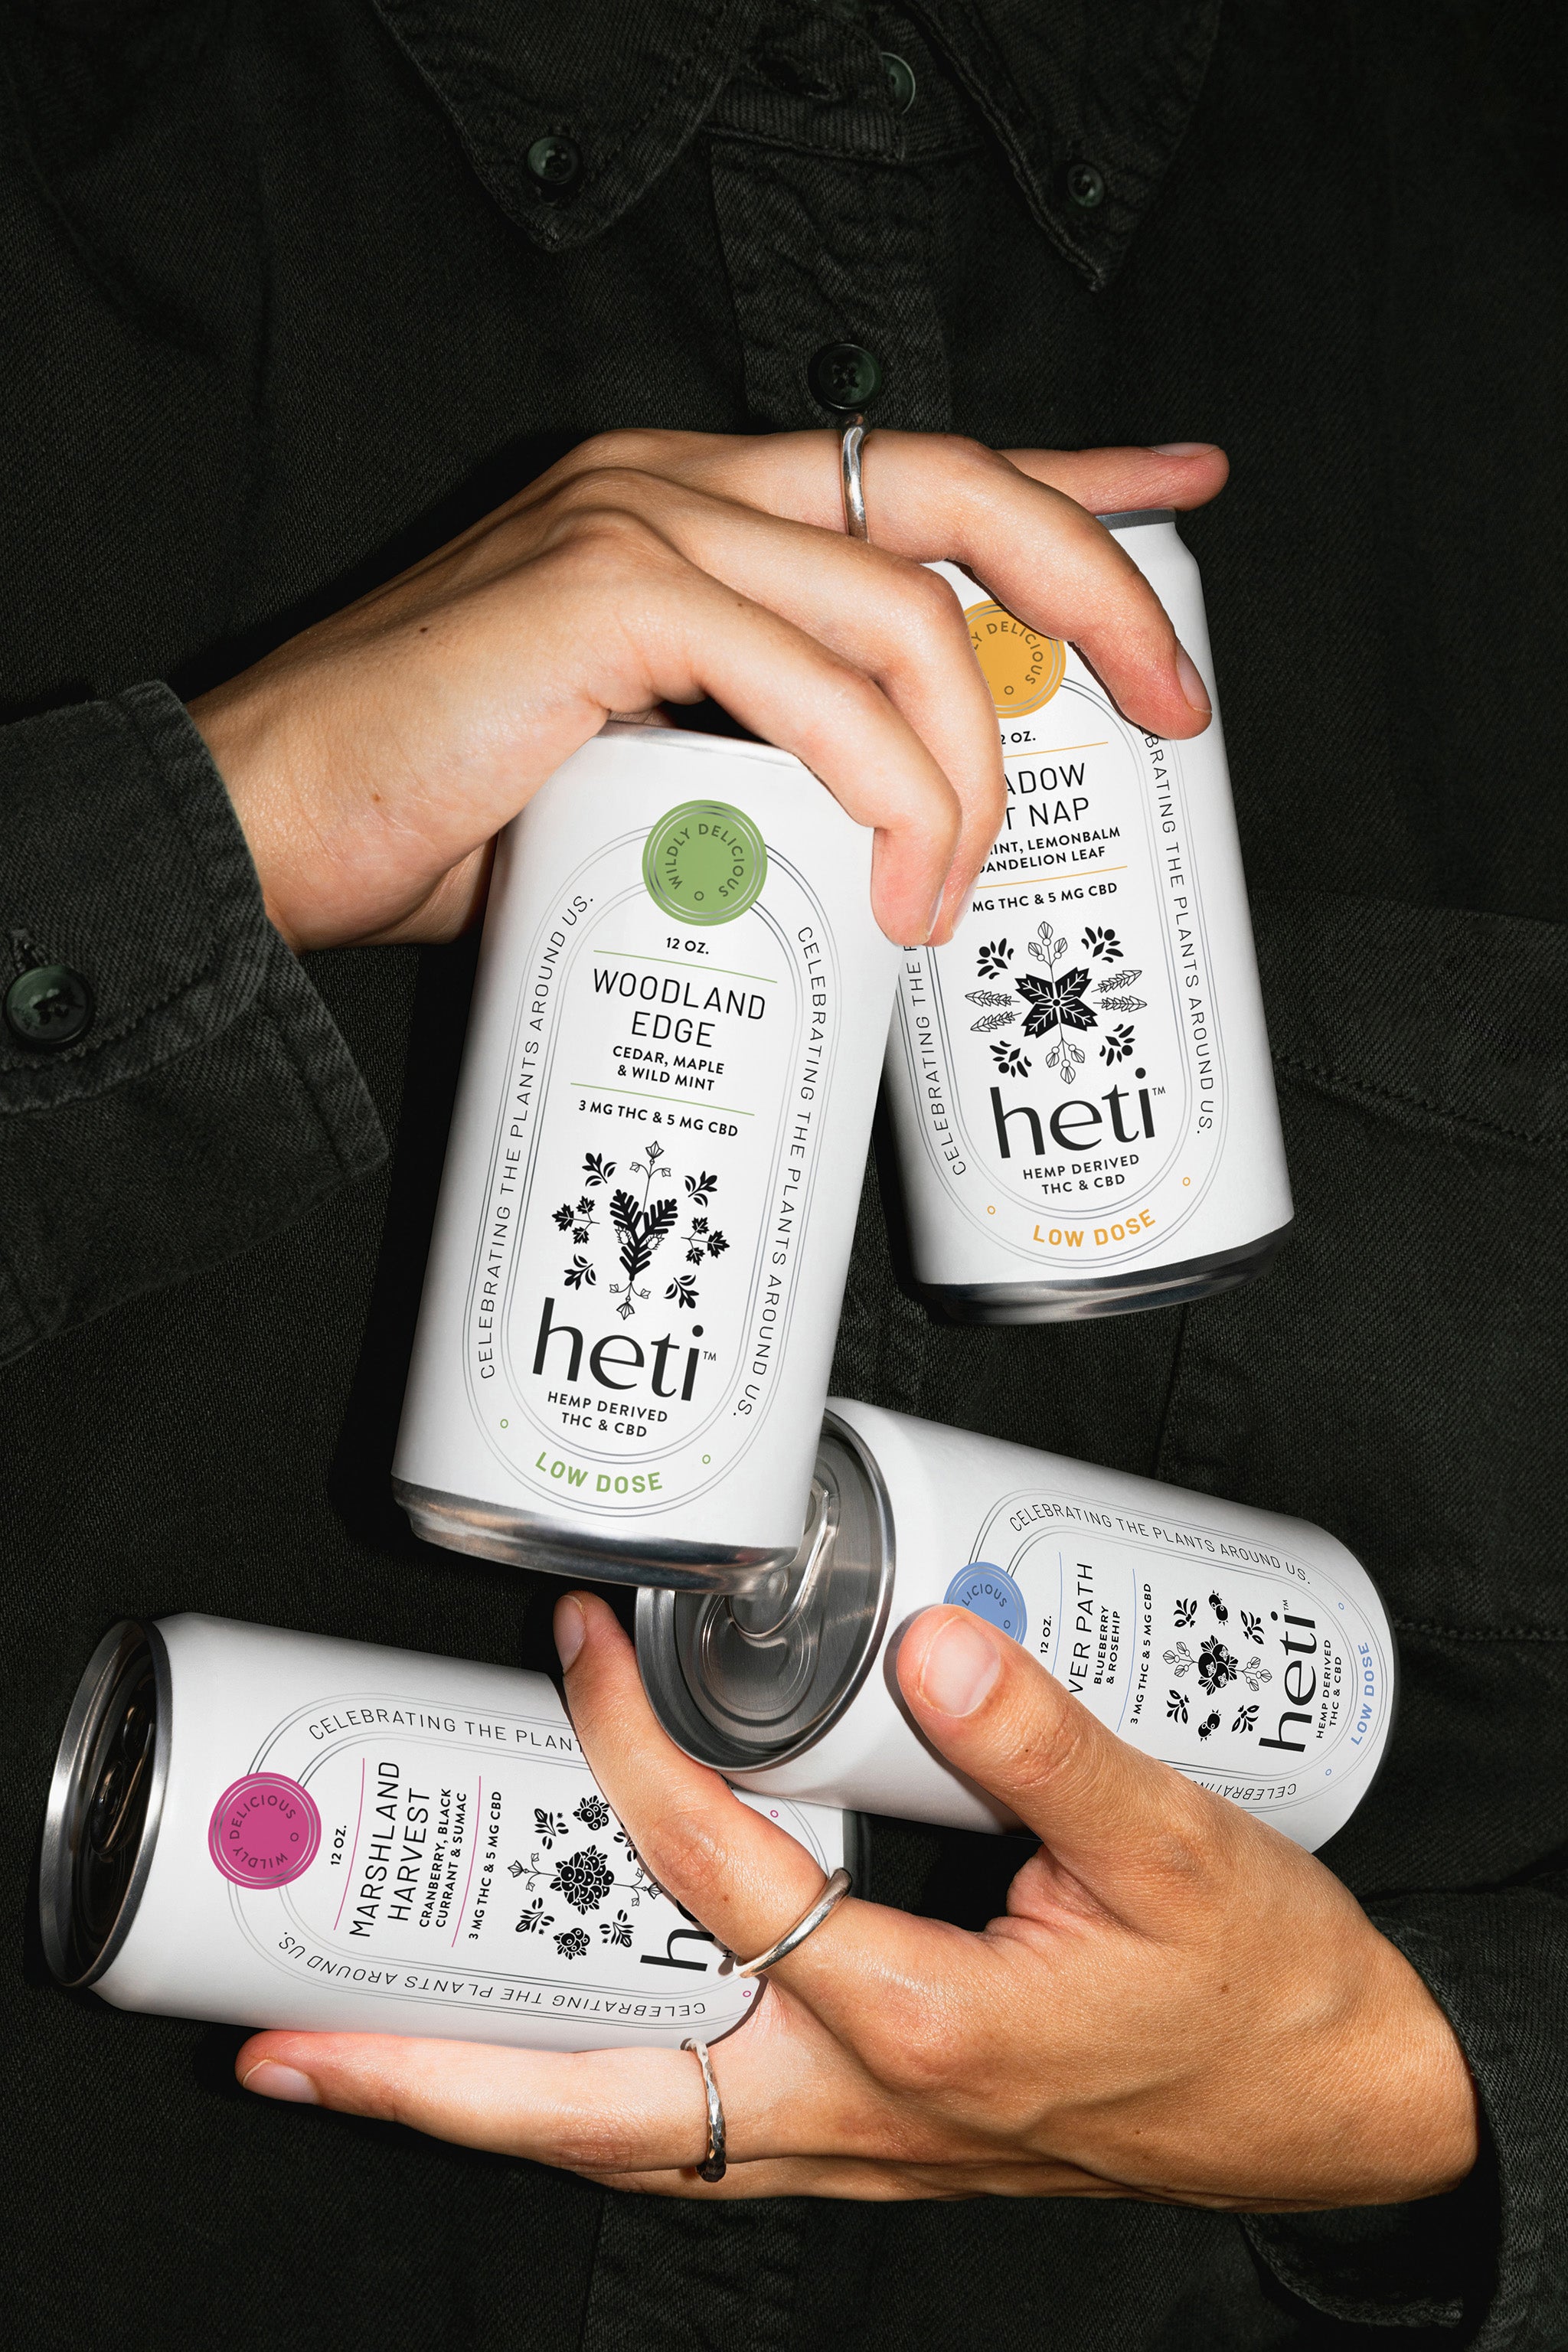 Hands holding four Heti botanical THC beverages River Path, Marshland Harvest, Meadow Cat Nap, and Woodland Edge